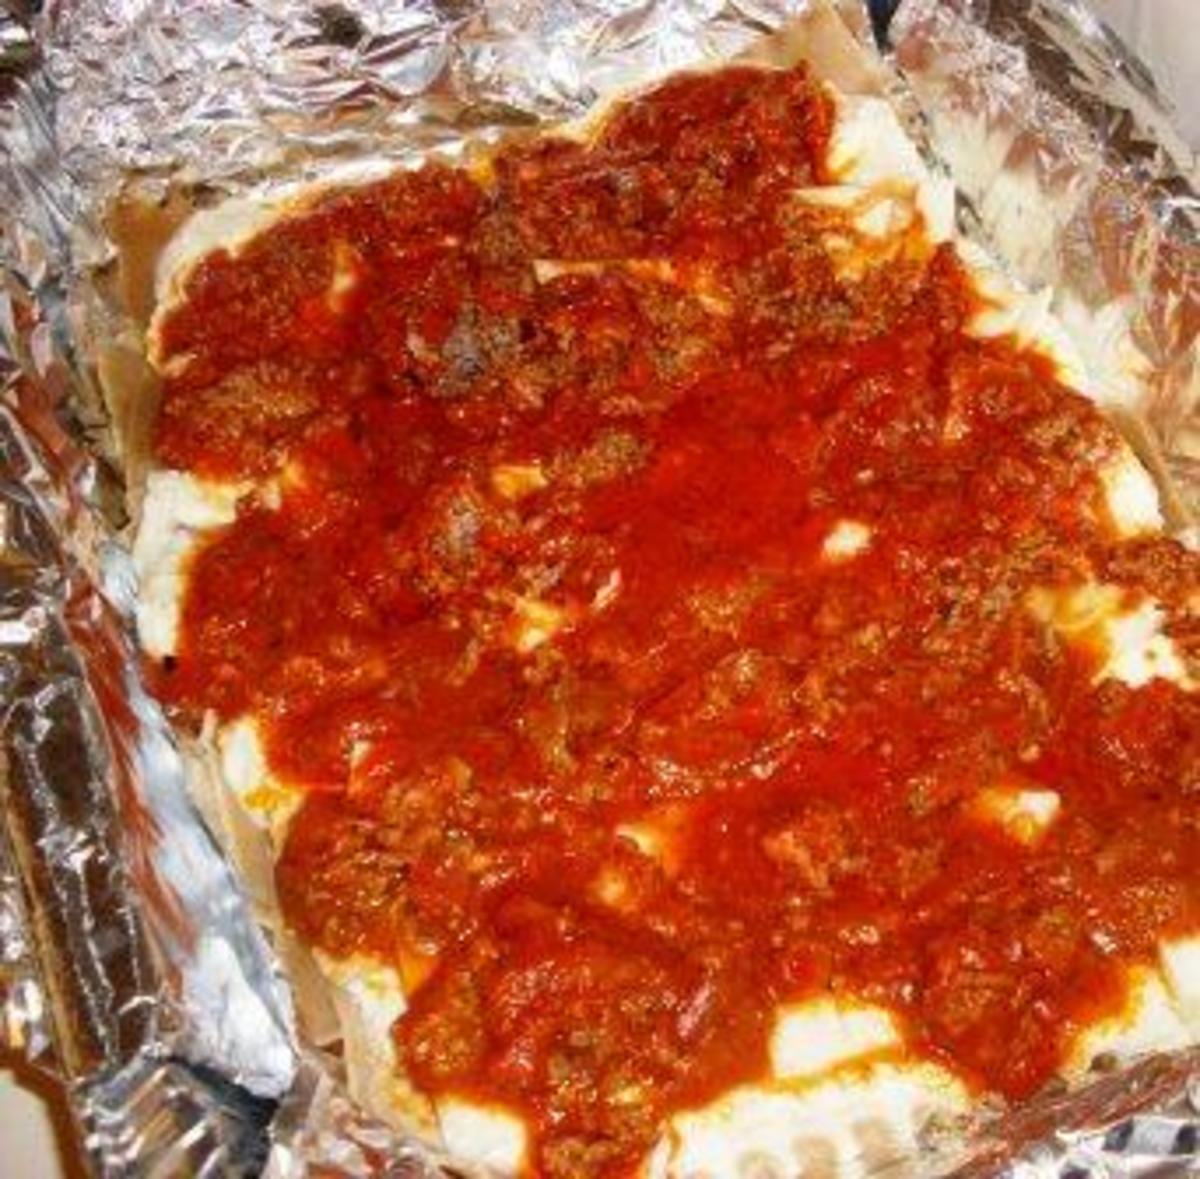 layer the meat sauce on top of the cheese mixture